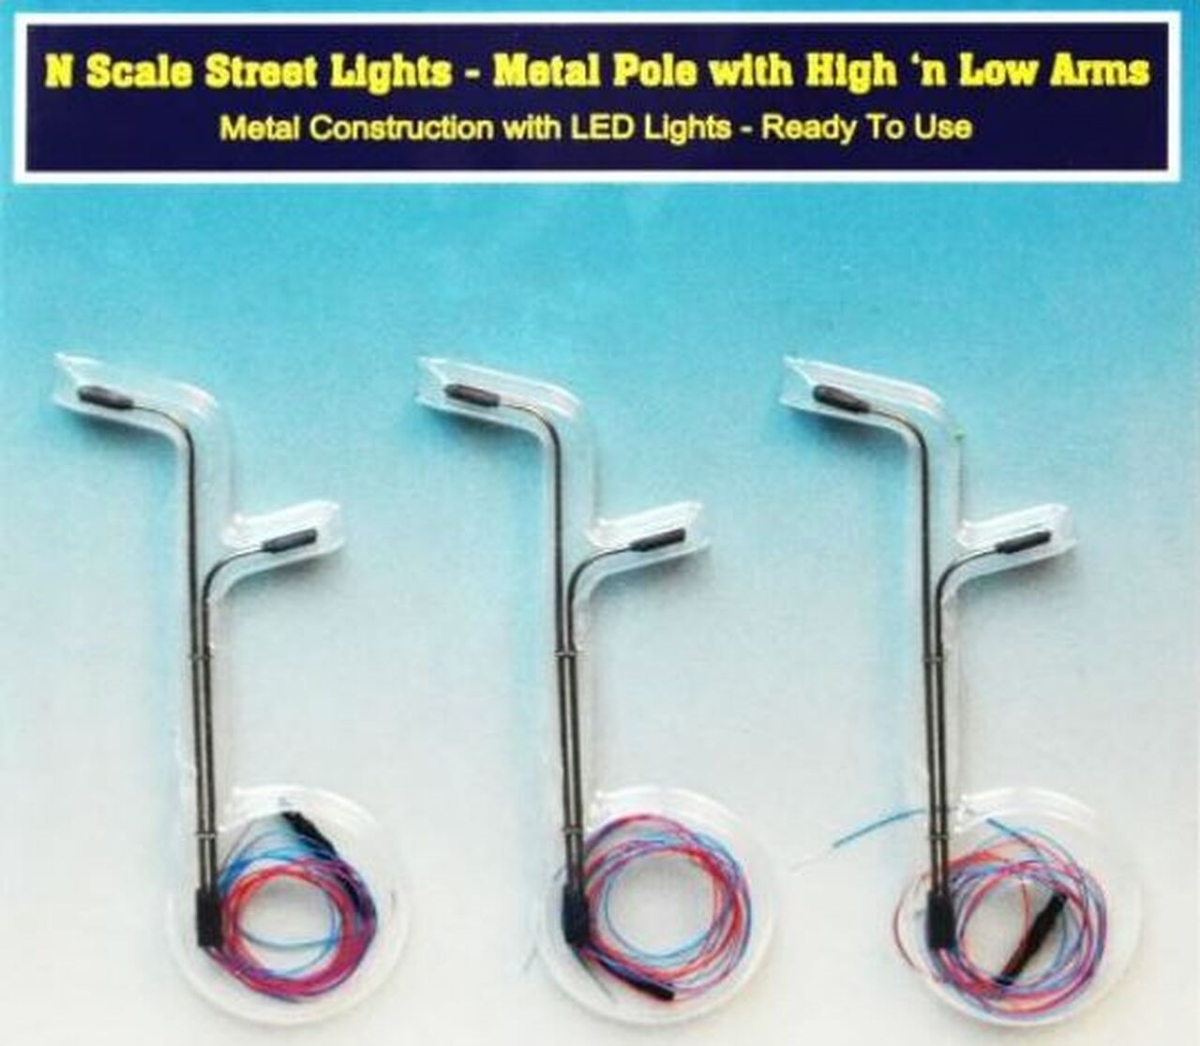 Picture of Rock Island Hobby RIH013103 N Scale Double Pole Street Lights with Two High-Low Arms